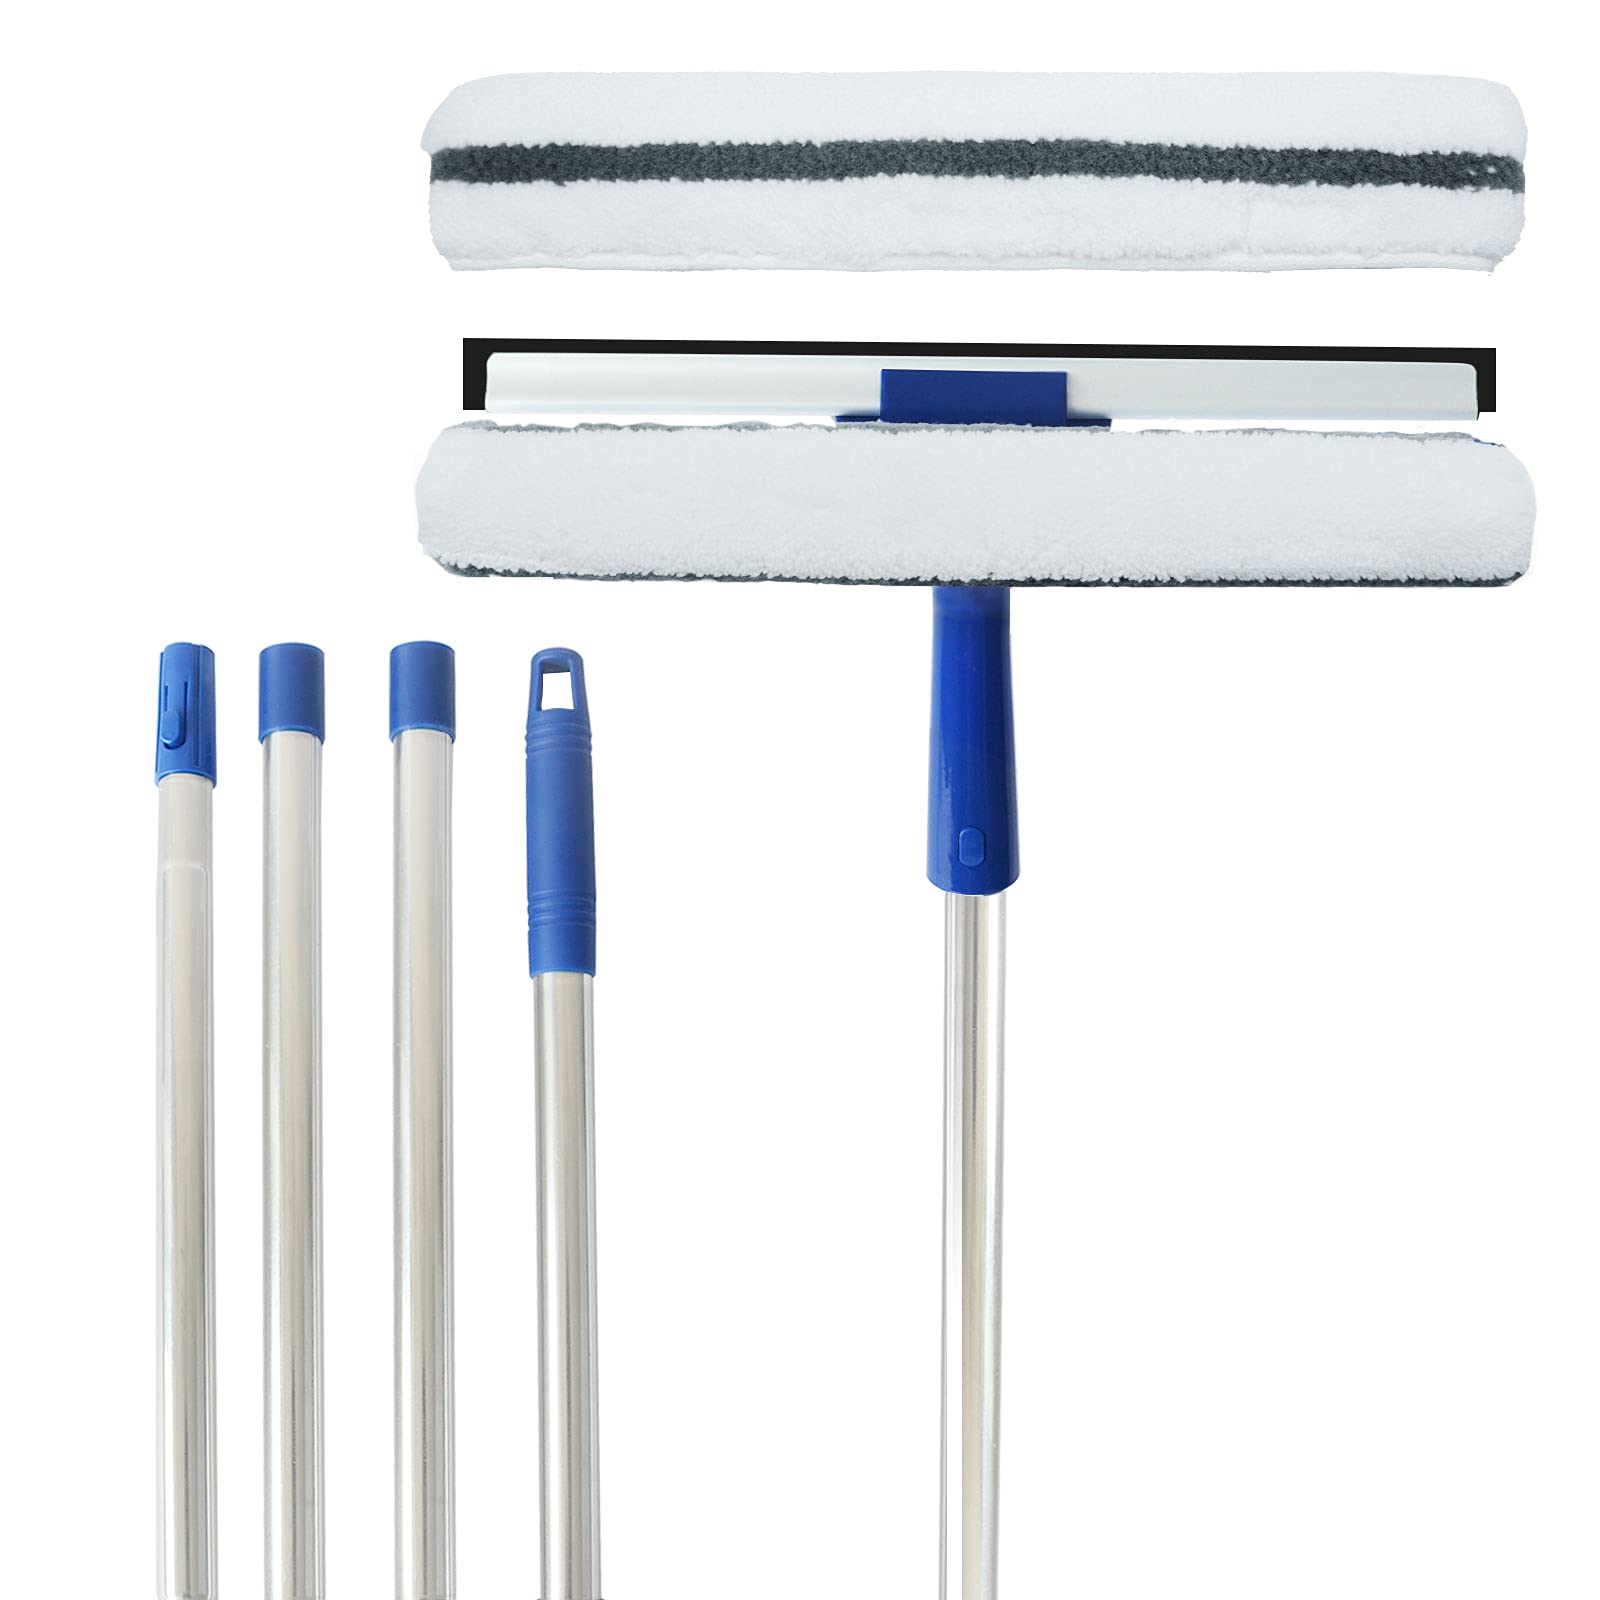 ITTAHO All Purpose Window Squeegee with 58 Long Handle + 2 Microfiber Pads